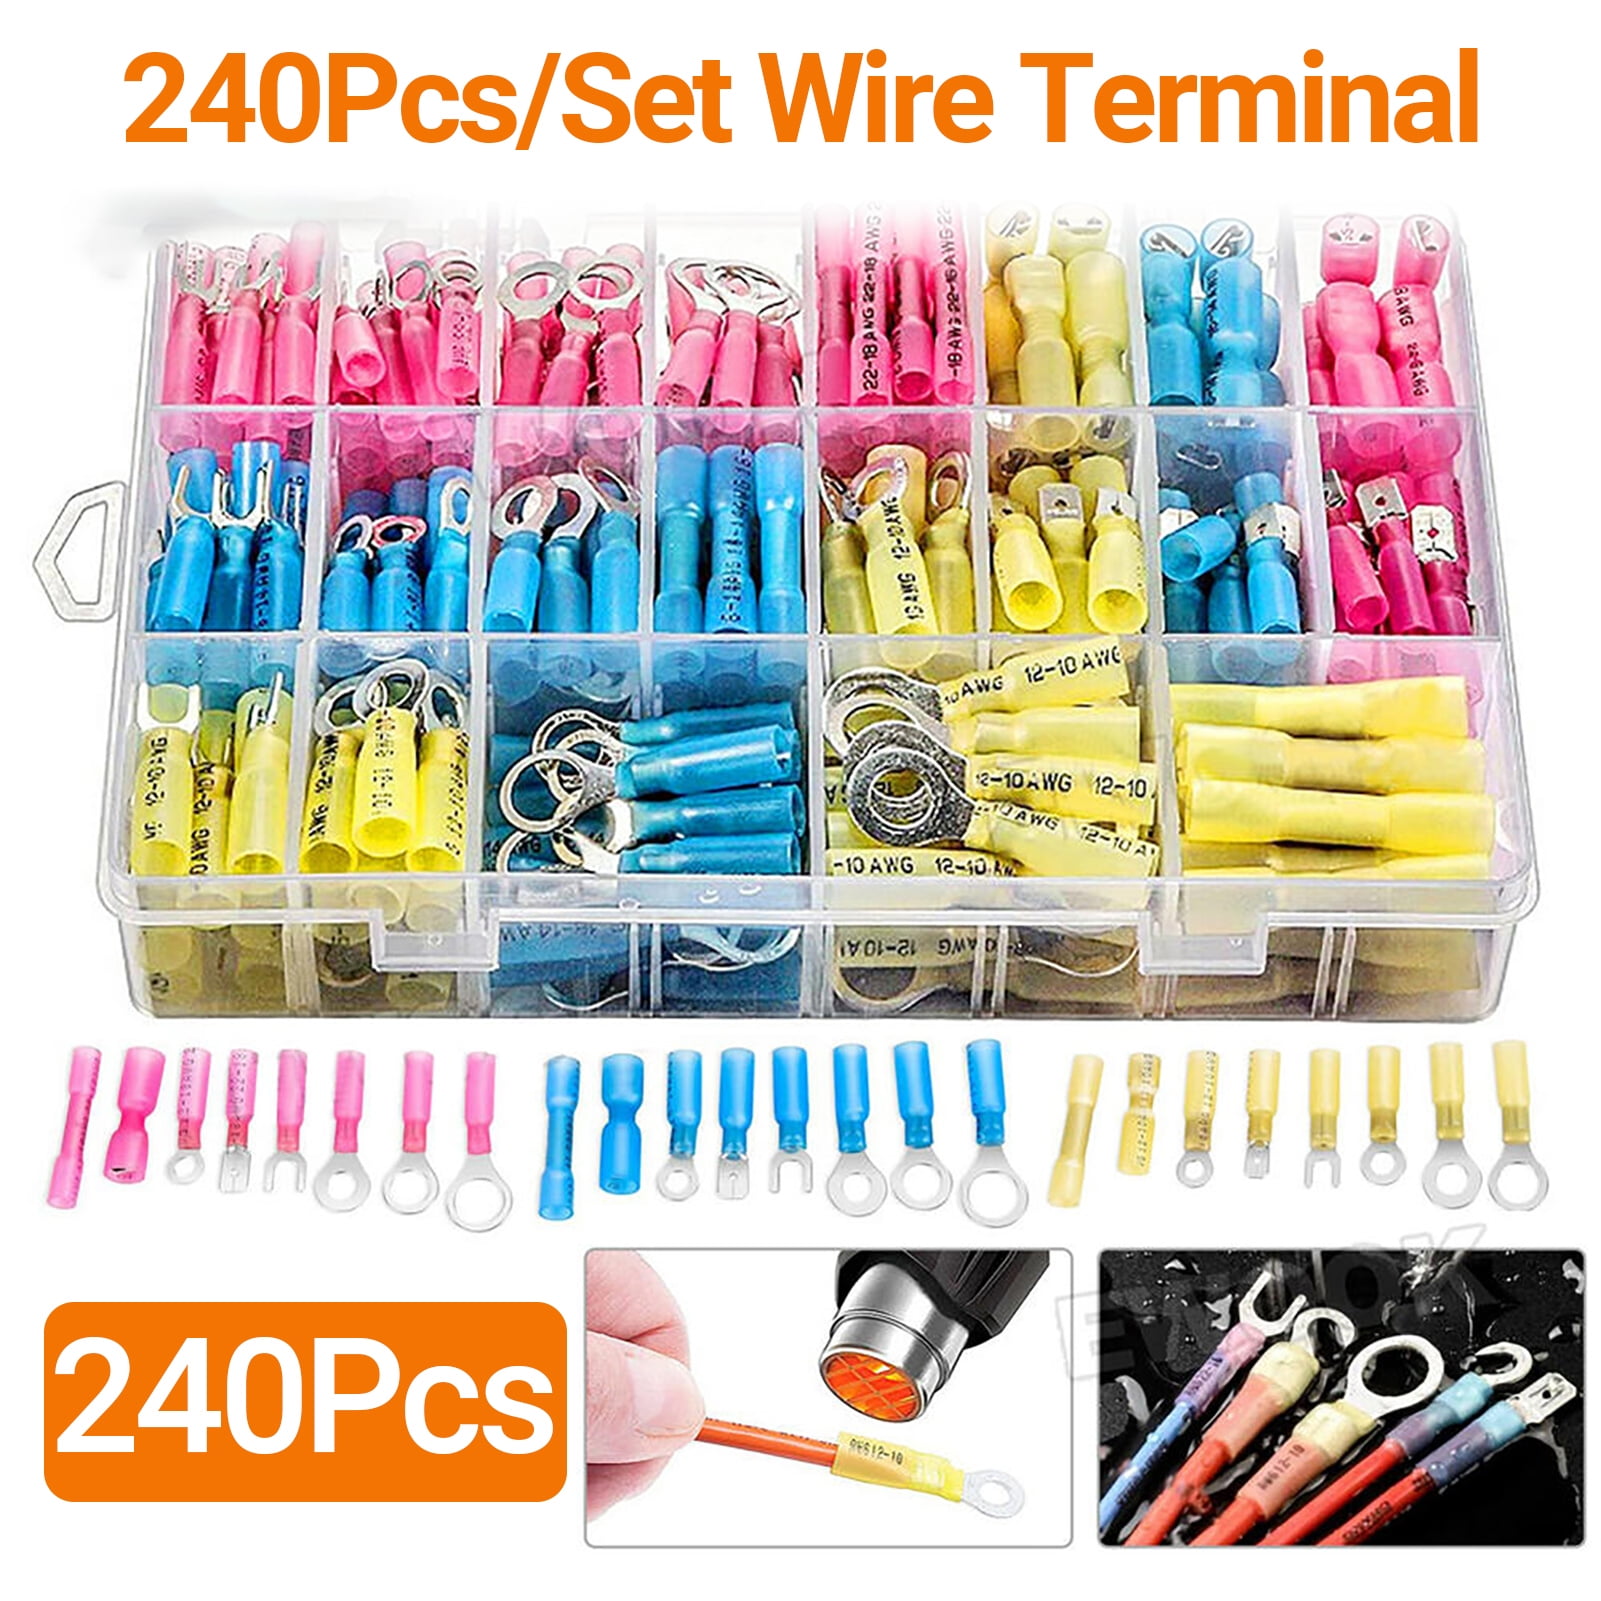 60Pcs AWG Heat Shrink Insulated Electrical Wire Connectors Bullet Terminals M/F 